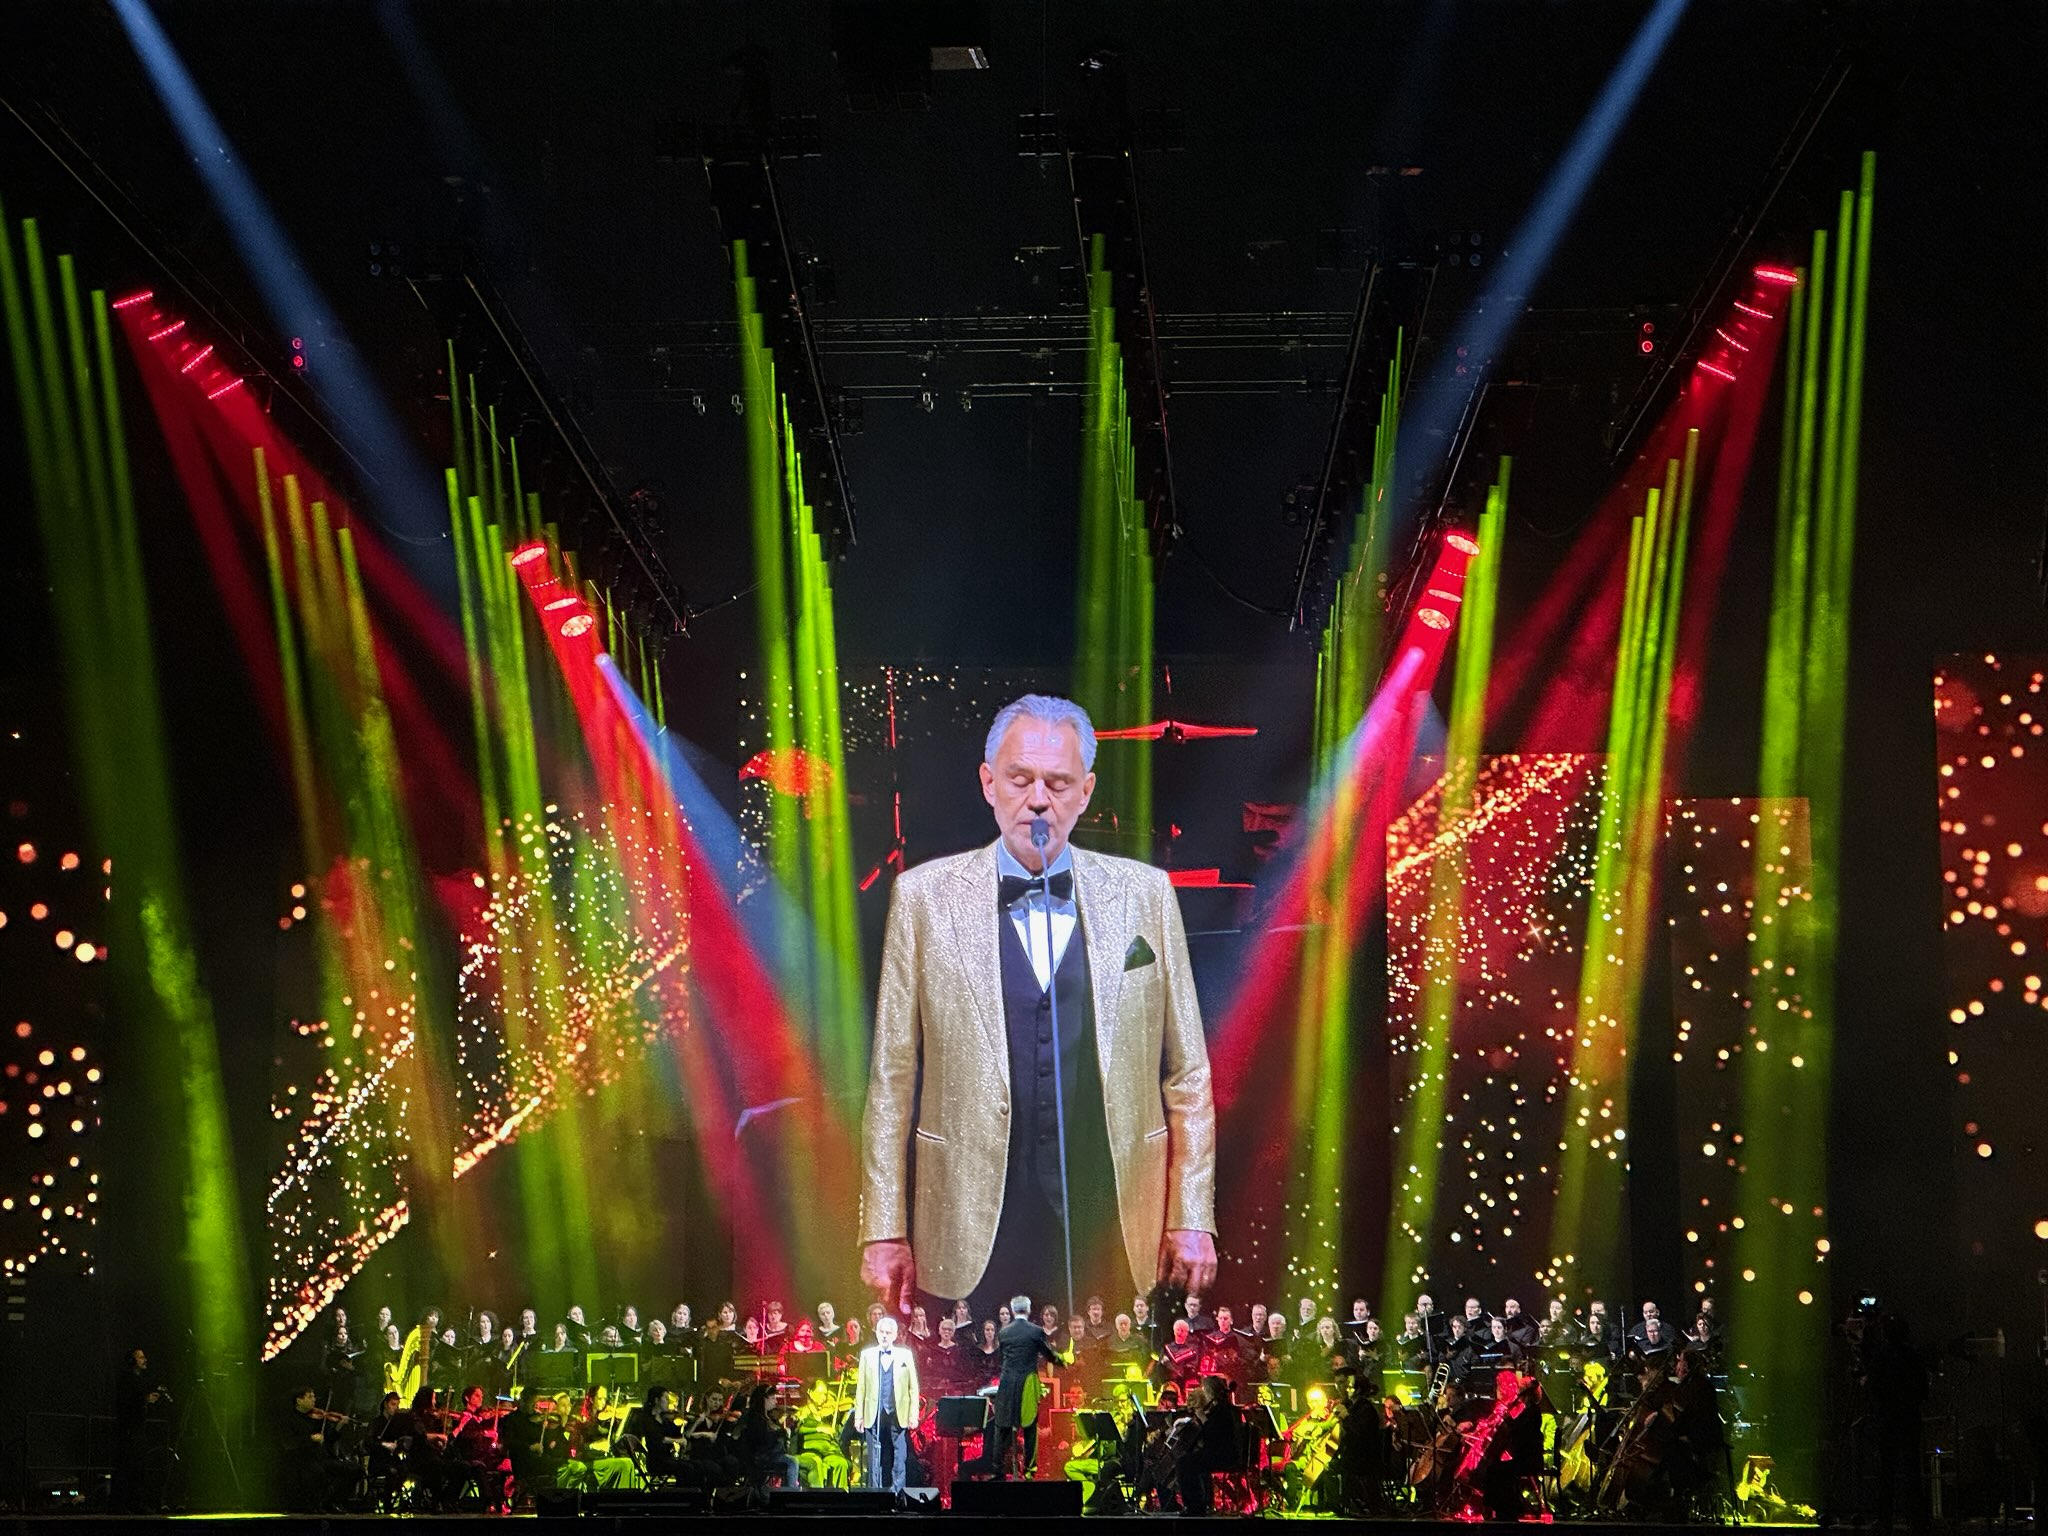 OSA International provides Ayrton lighting, grandMA3 consoles and MDG TheONE atmospheric generators to Andrea Bocelli’s North American Tour